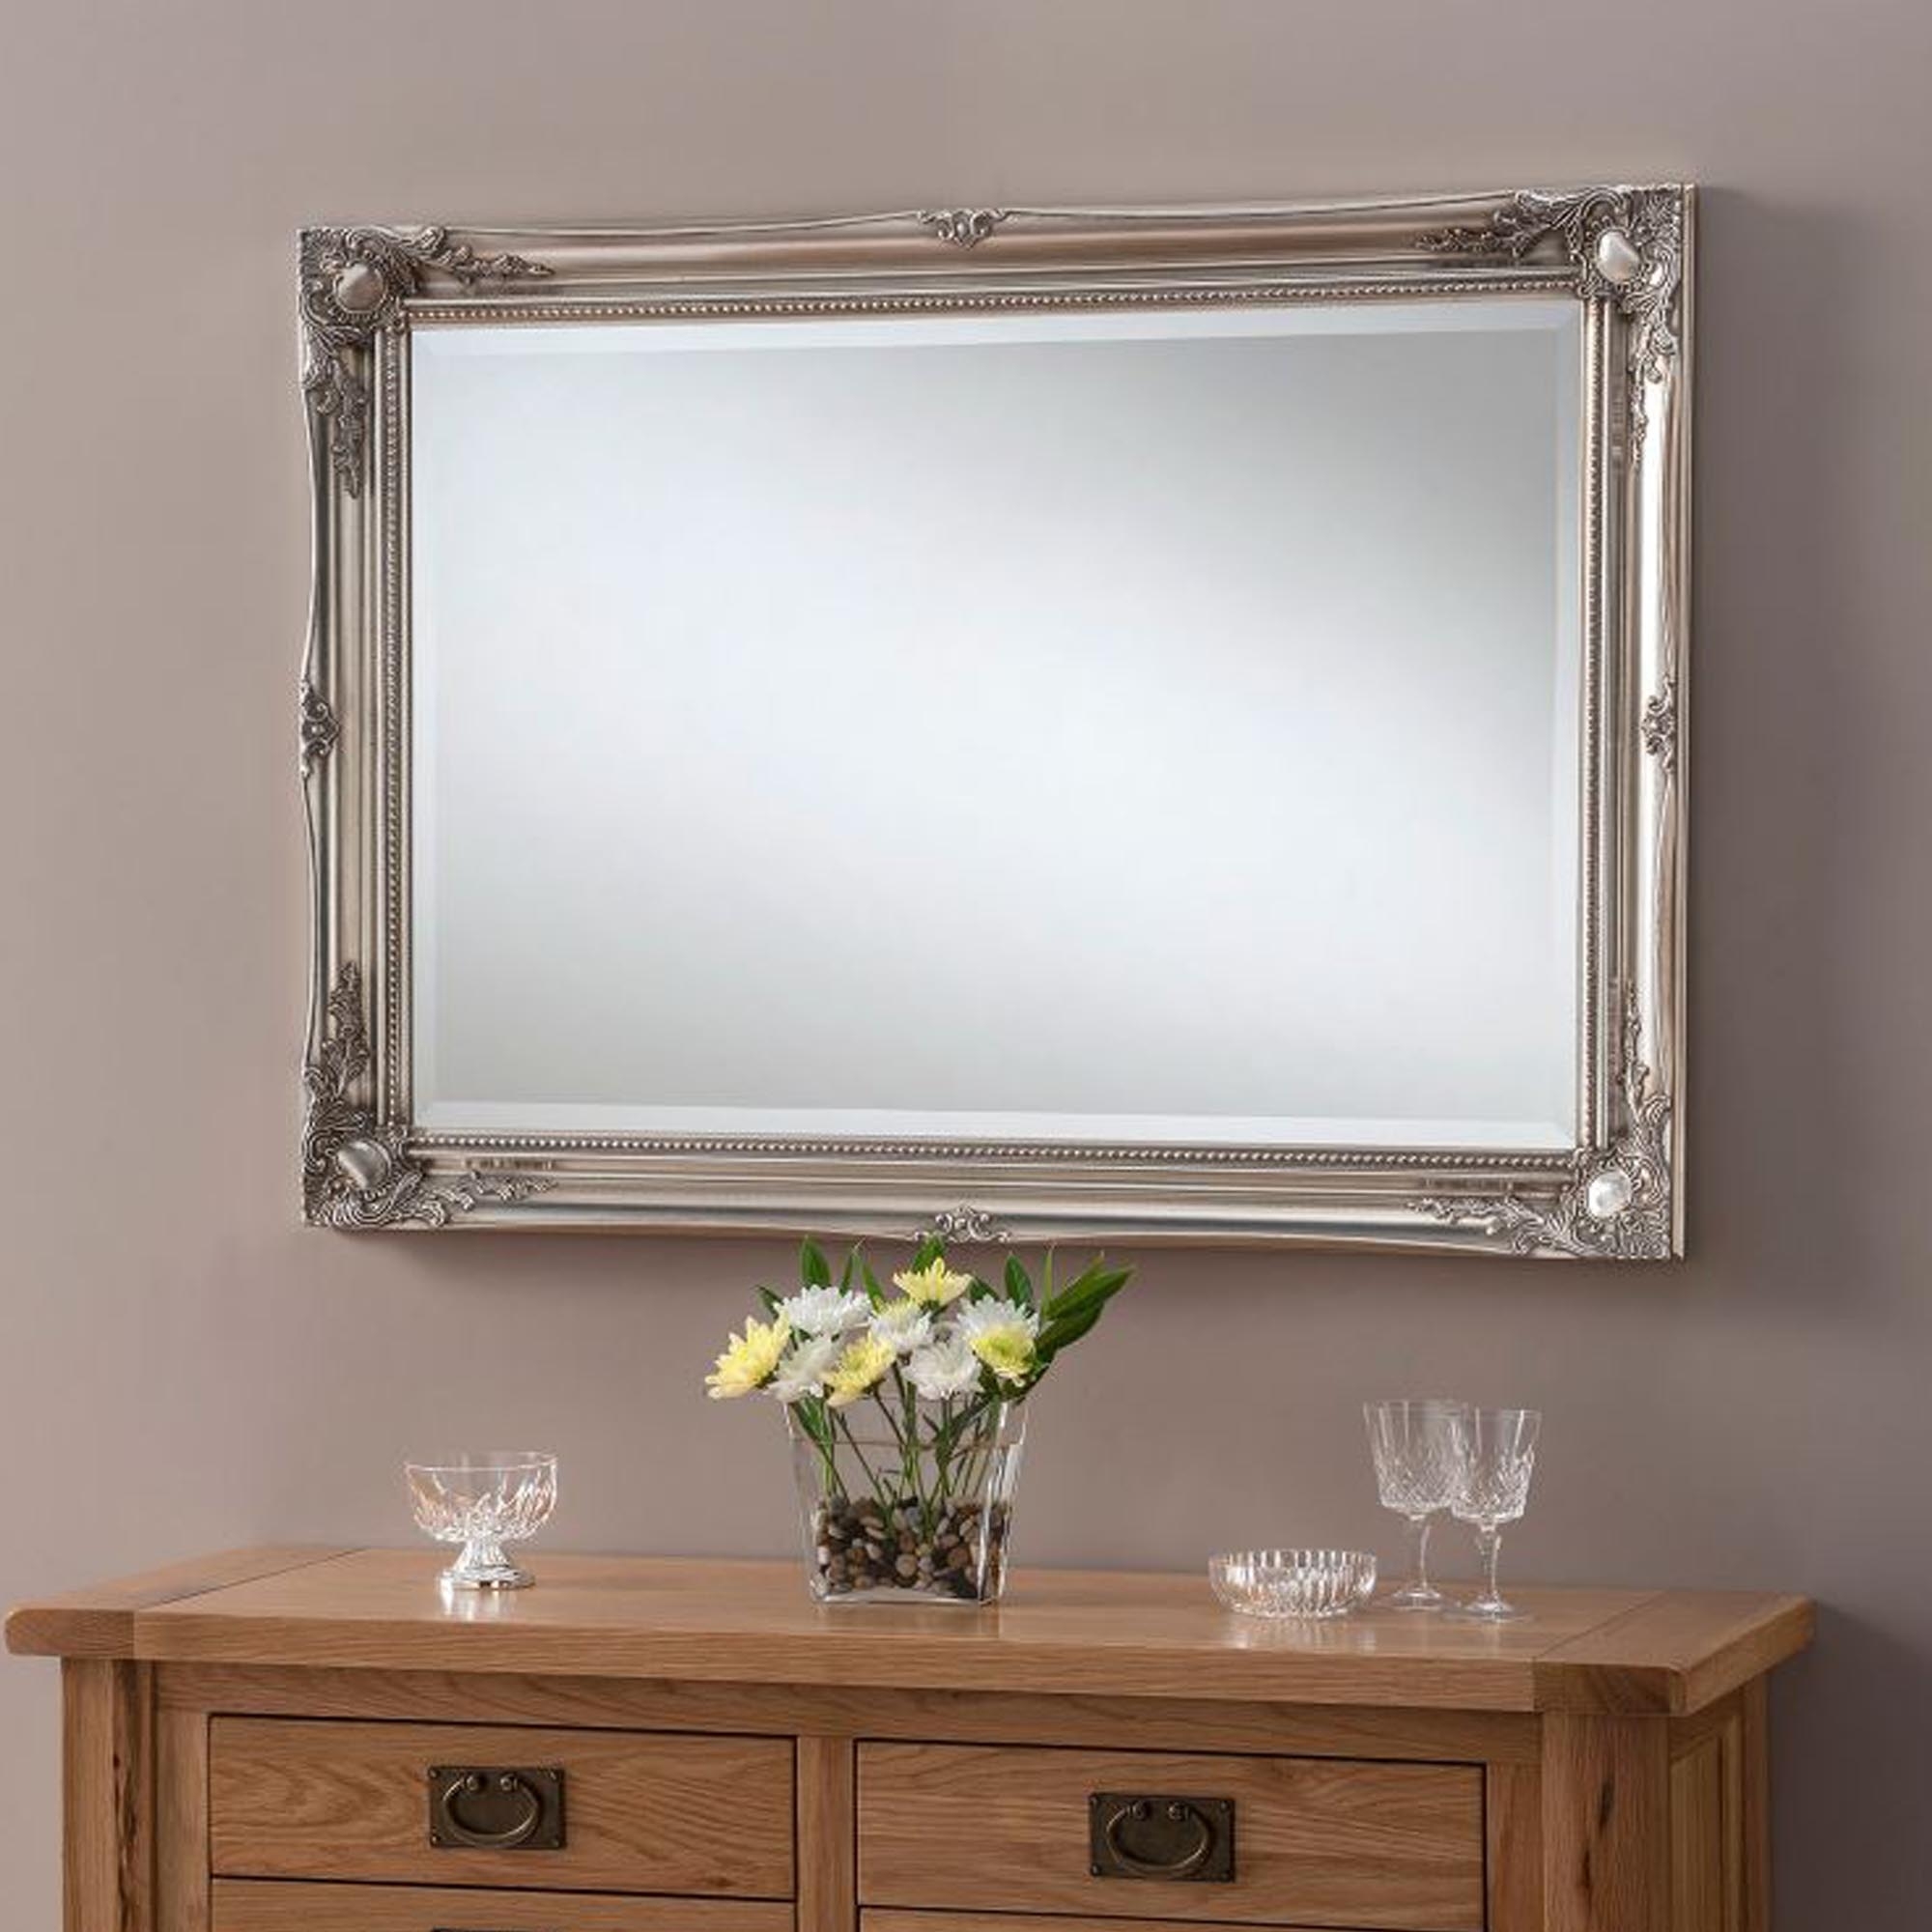 French Wall Mirror: A Reflection Of Elegance